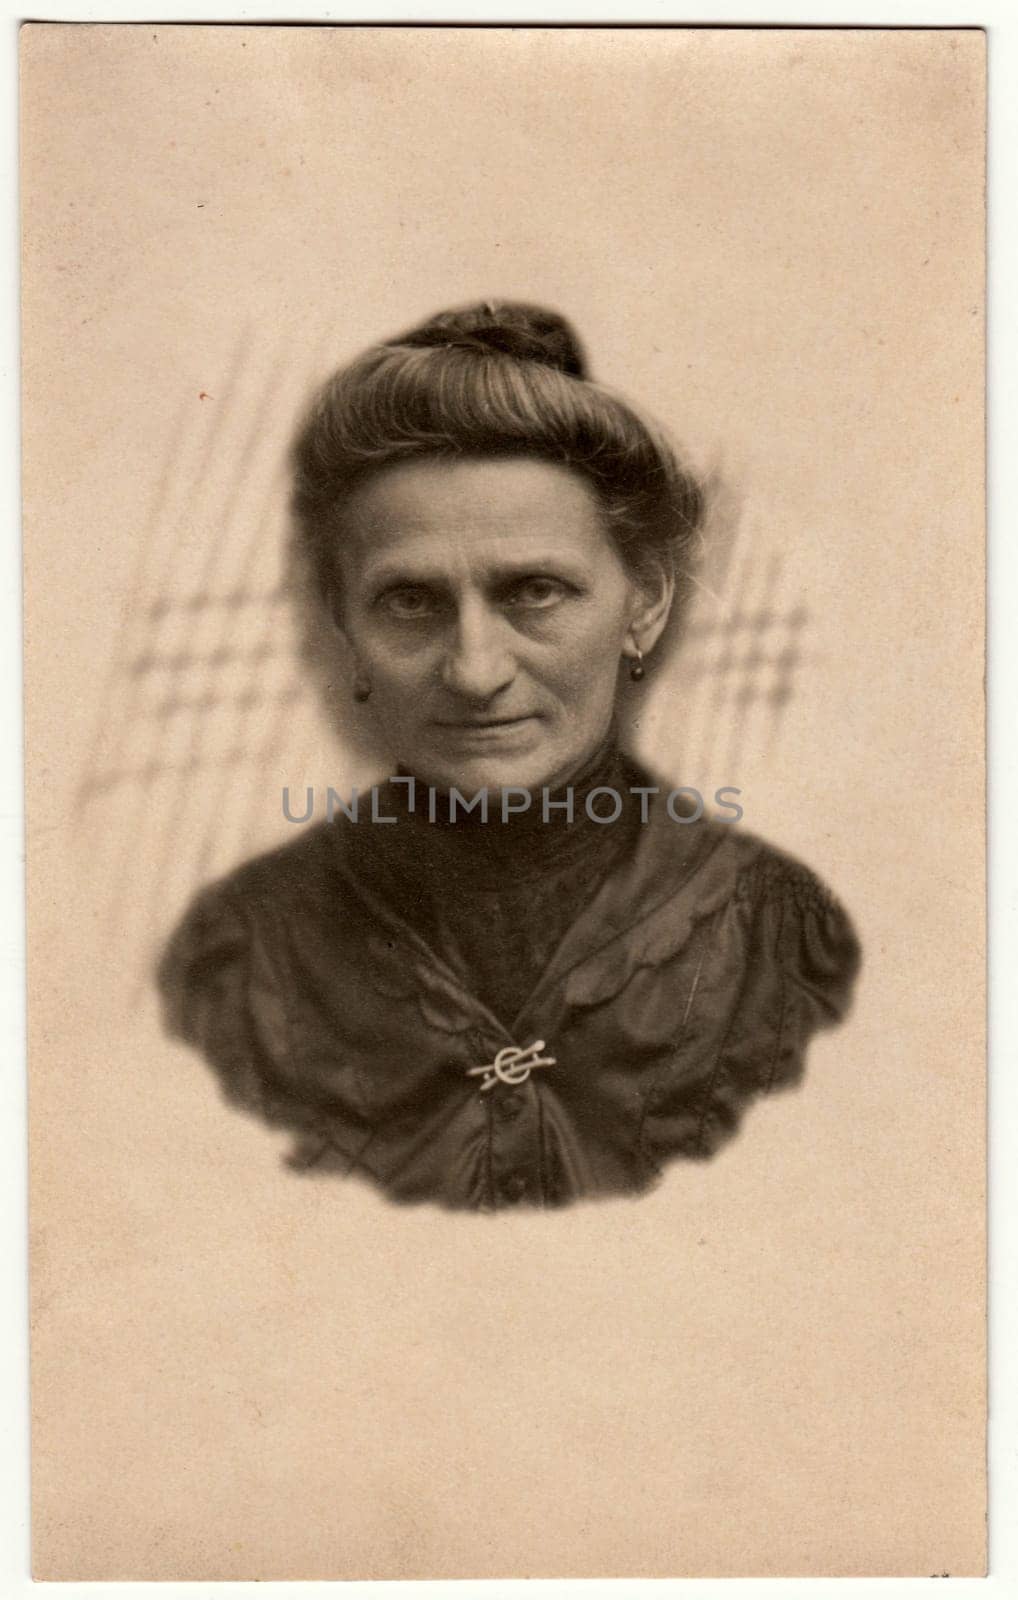 GERMANY - CIRCA 1930s: Vintage photo shows elderly woman - portrait in a photography studio. Woman with Edwardian hairstyle. Retro black and white studio photography with sepia effect. Head is drawn to body.